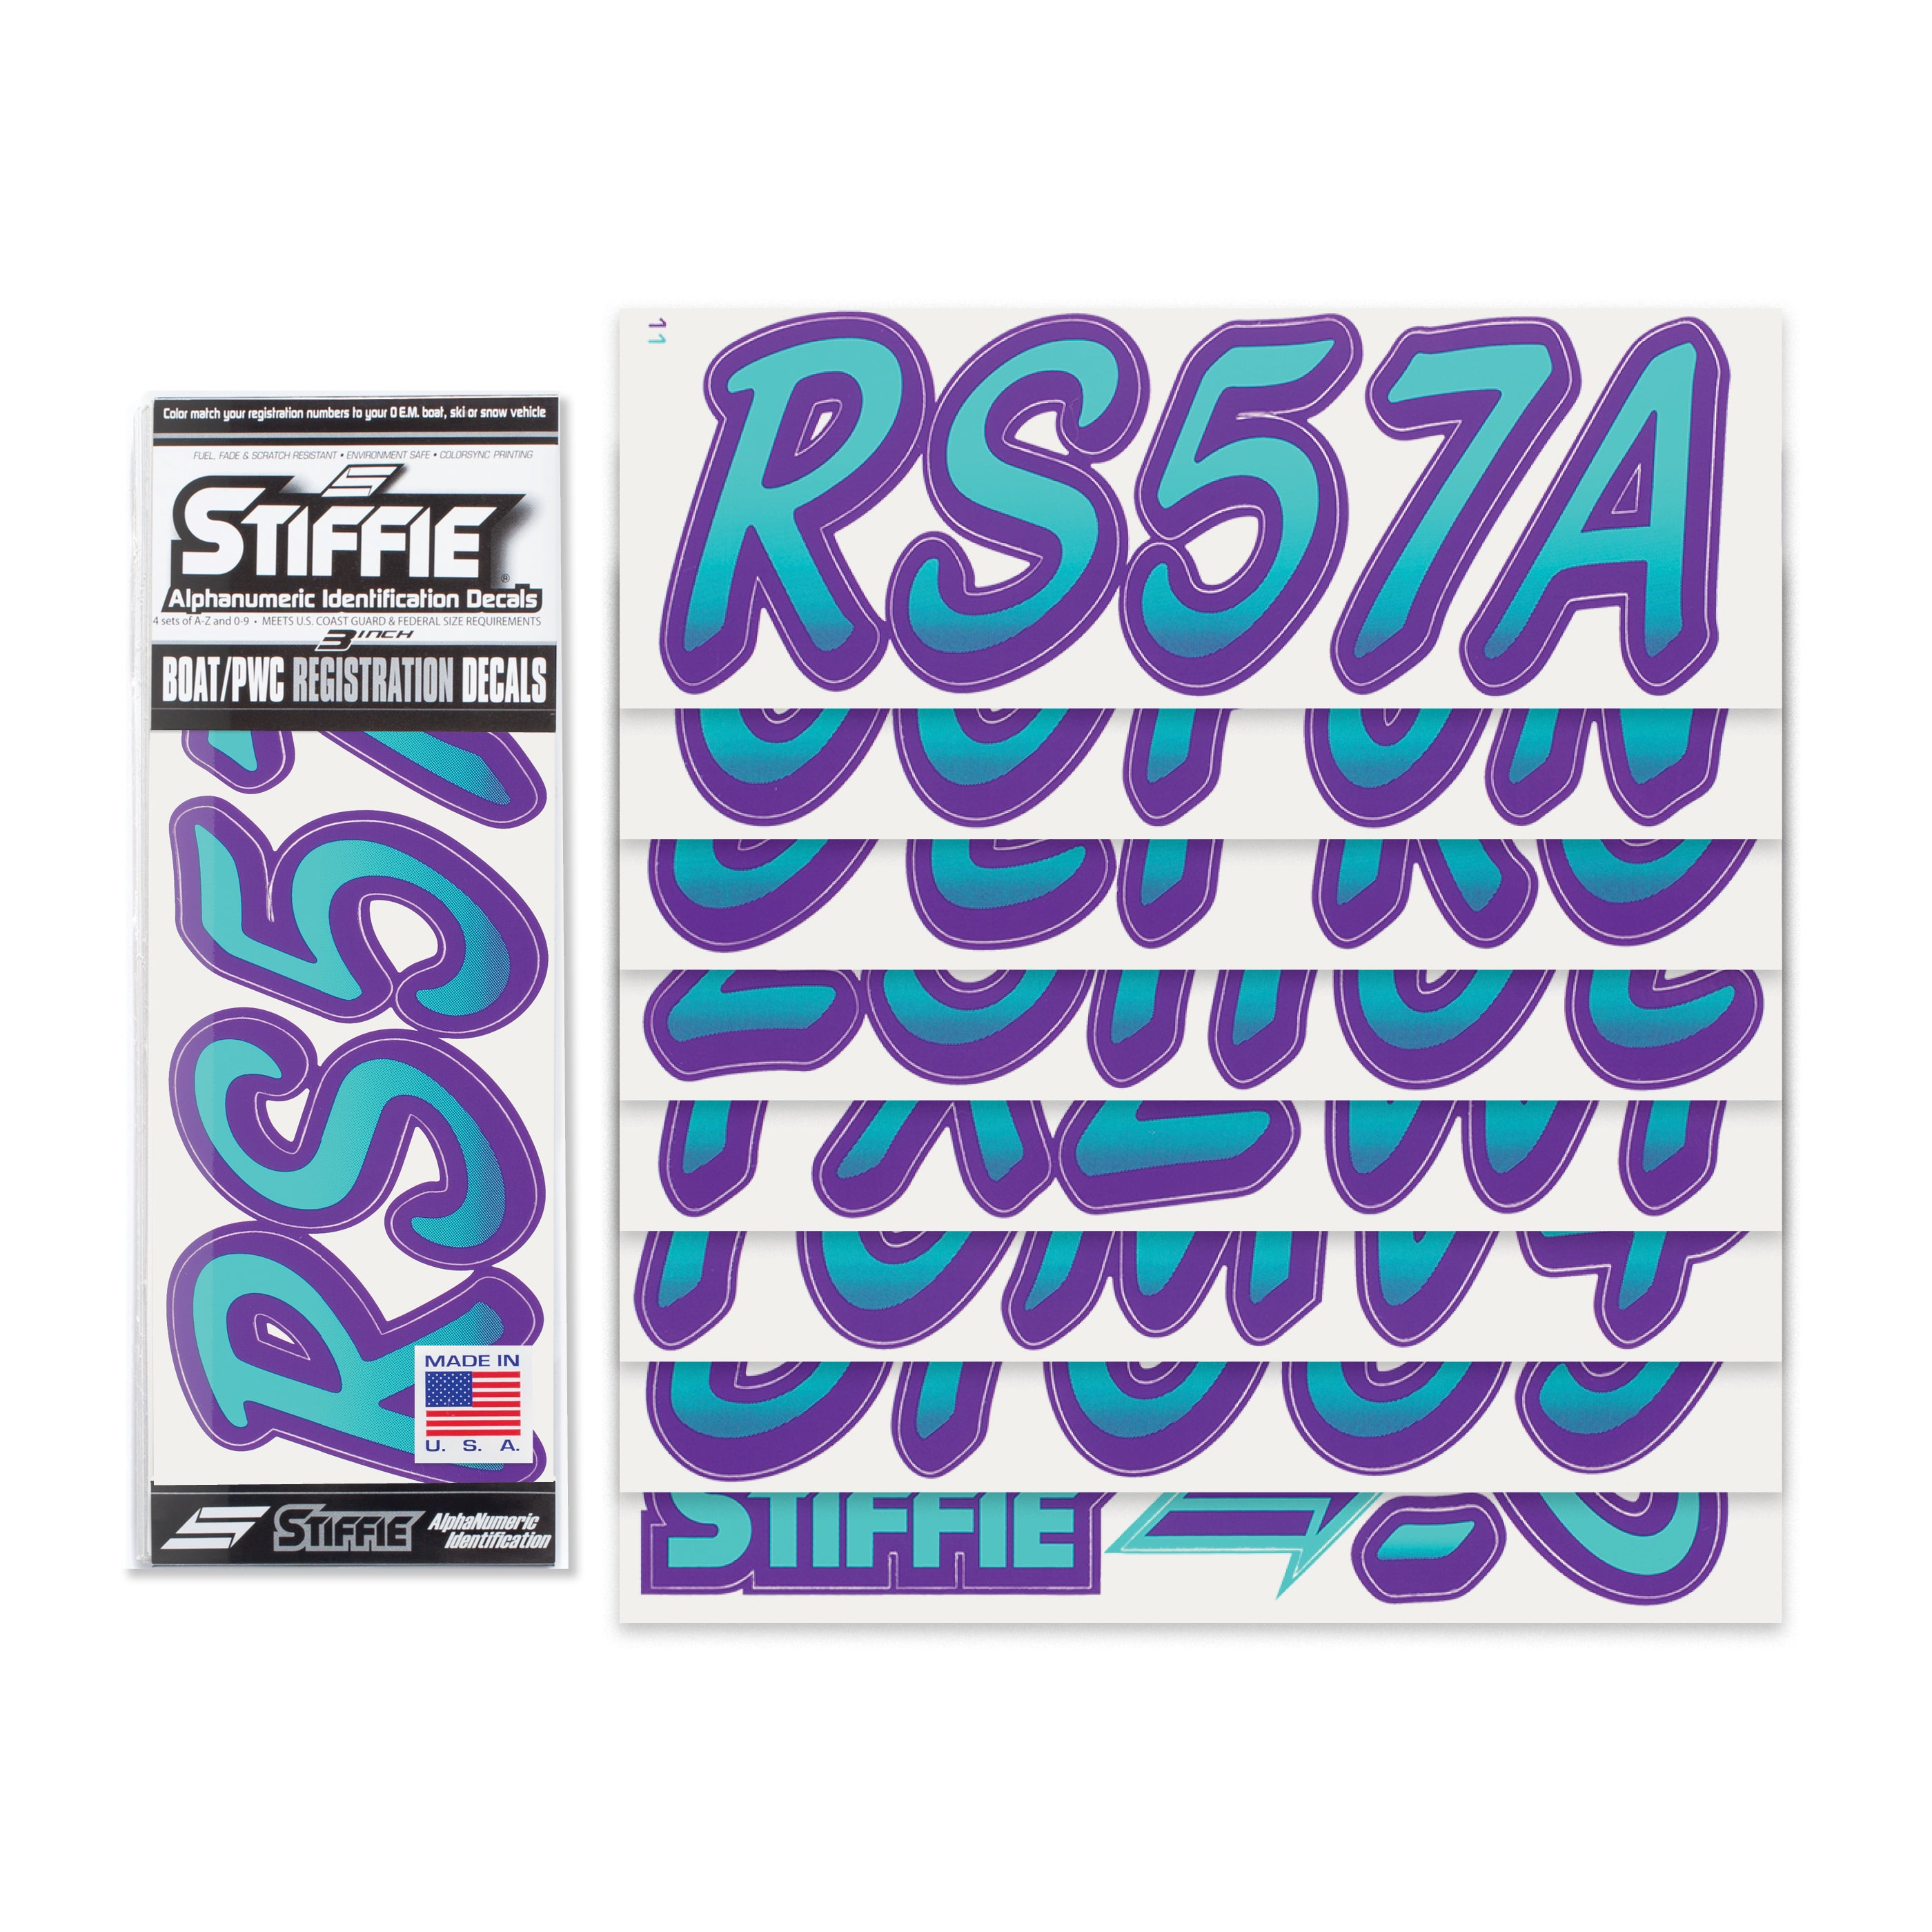 STIFFIE Whipline Sea Teal/Purple 3" Alpha-Numeric Registration Identification Numbers Stickers Decals for Boats & Personal Watercraft